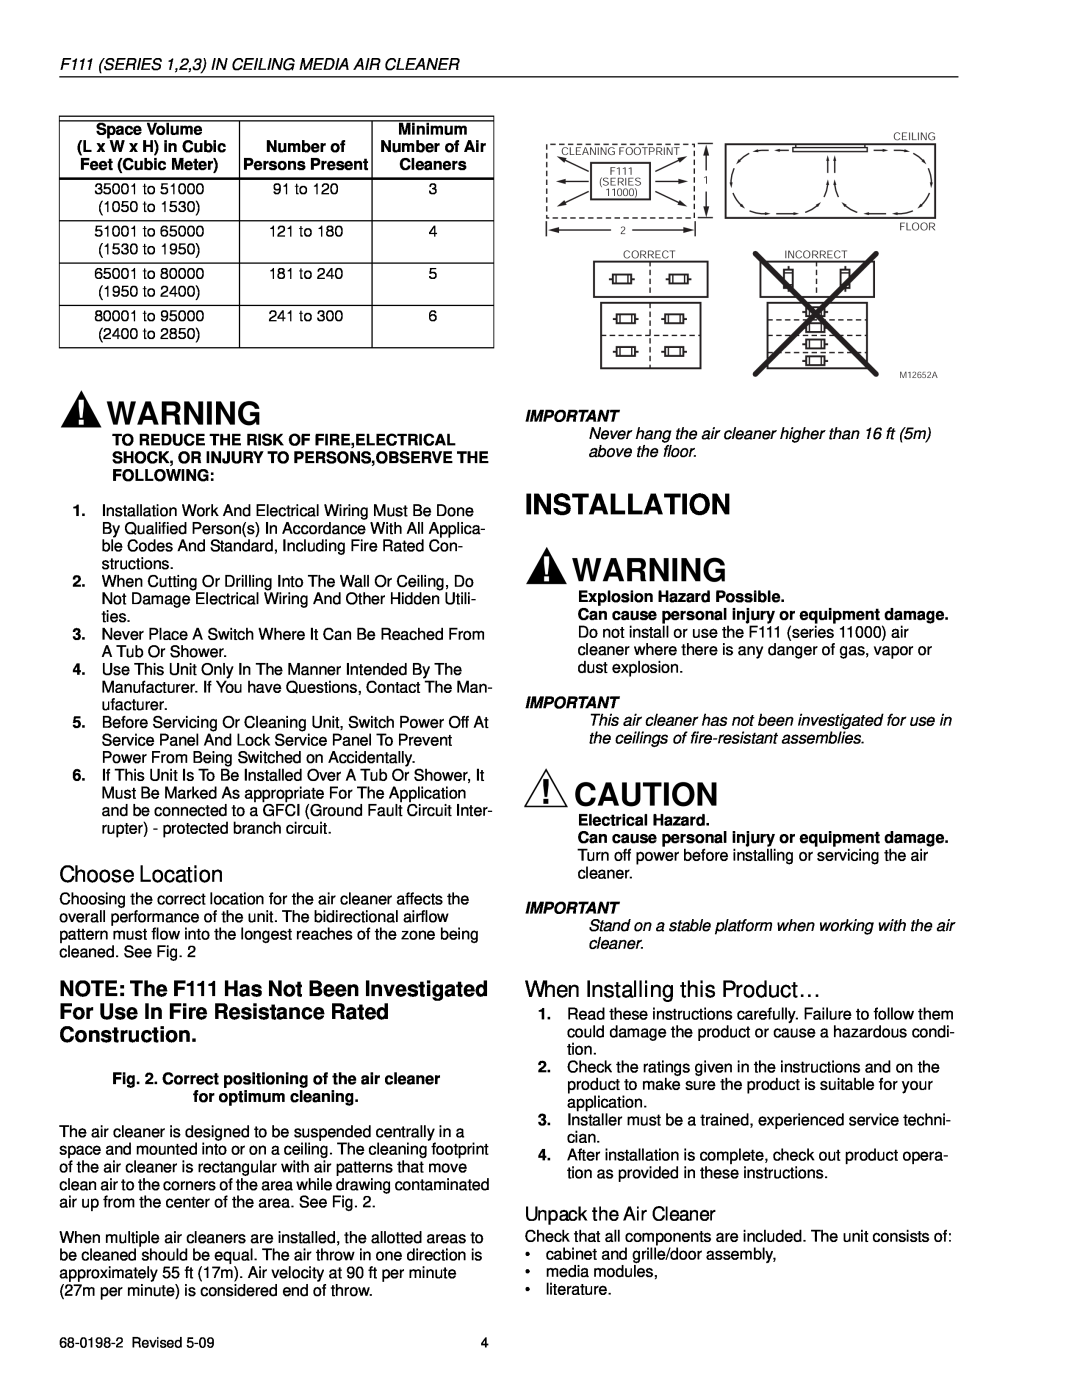 Honeywell F111 Series 3 specifications Installation, Choose Location, When Installing this Product…, Unpack the Air Cleaner 